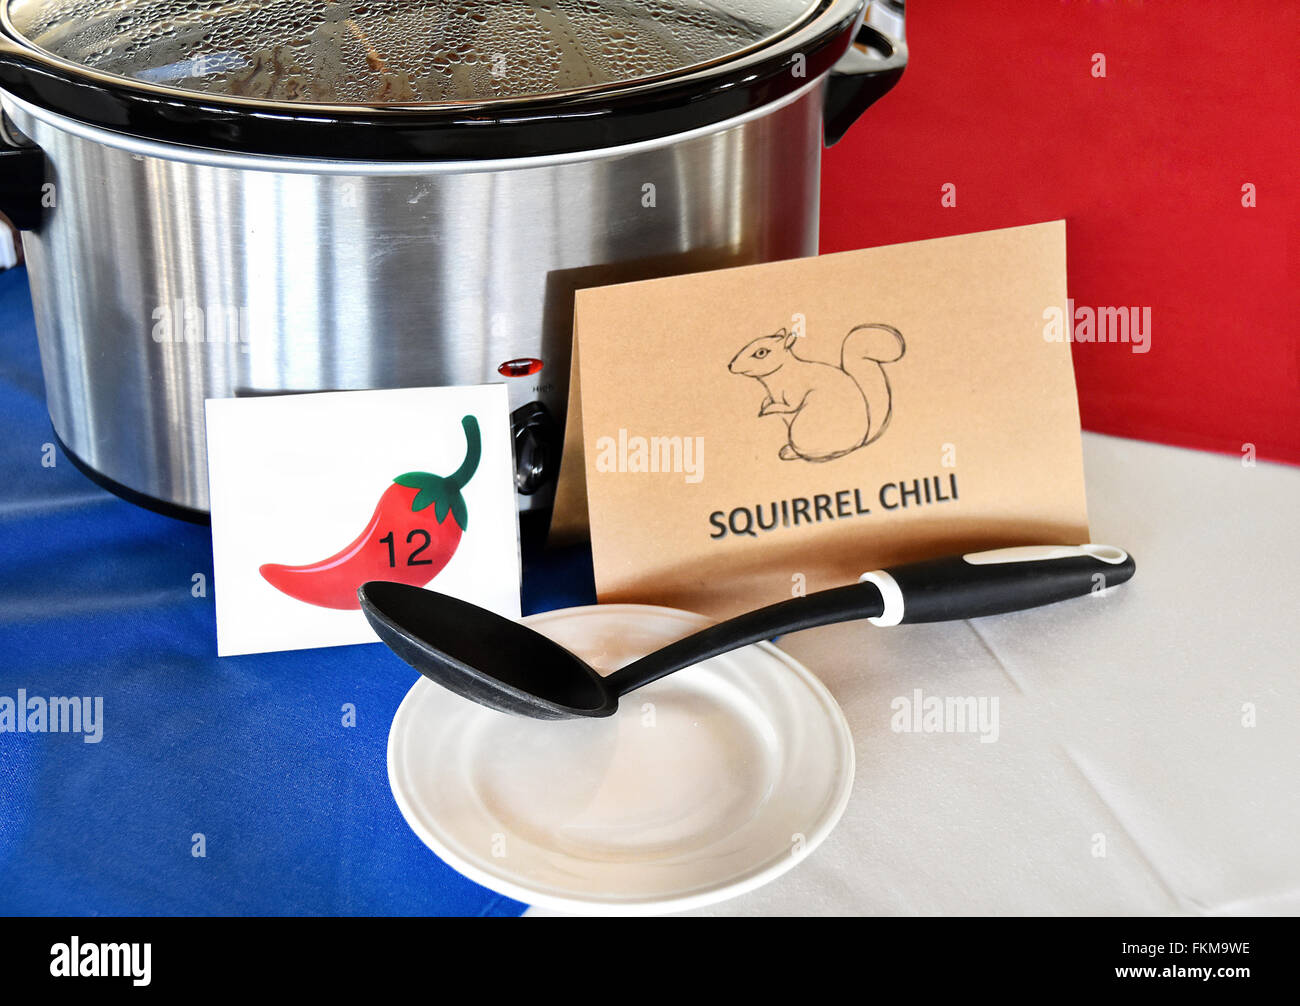 Crock pot with squirrel chili sign and black ladle on plate for chili cook off contest. Stock Photo